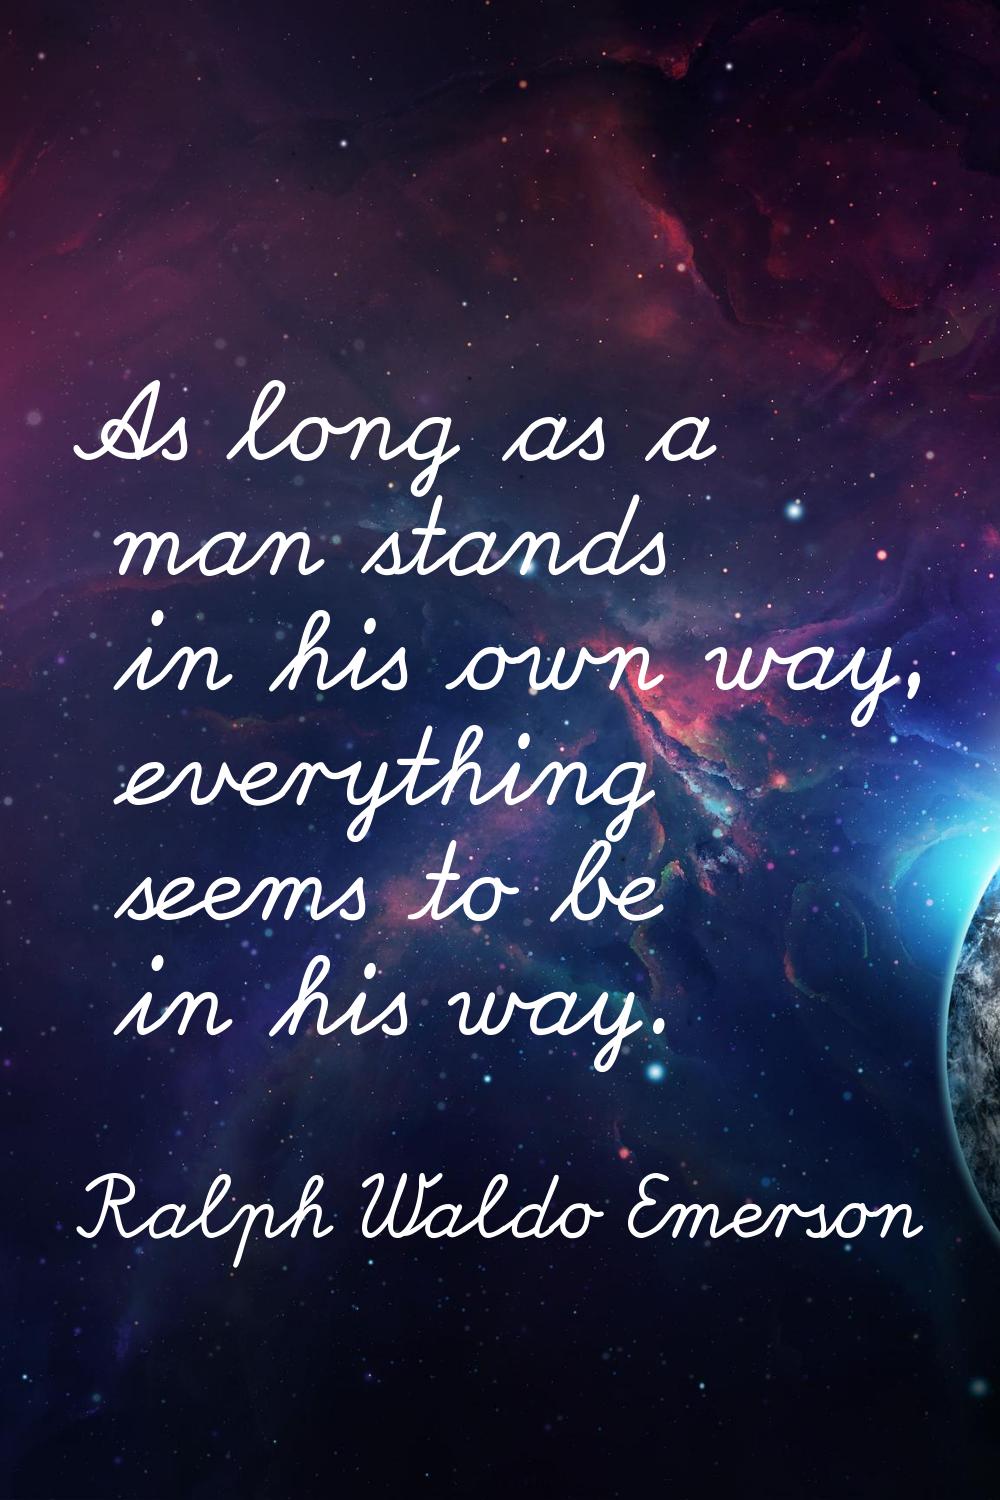 As long as a man stands in his own way, everything seems to be in his way.